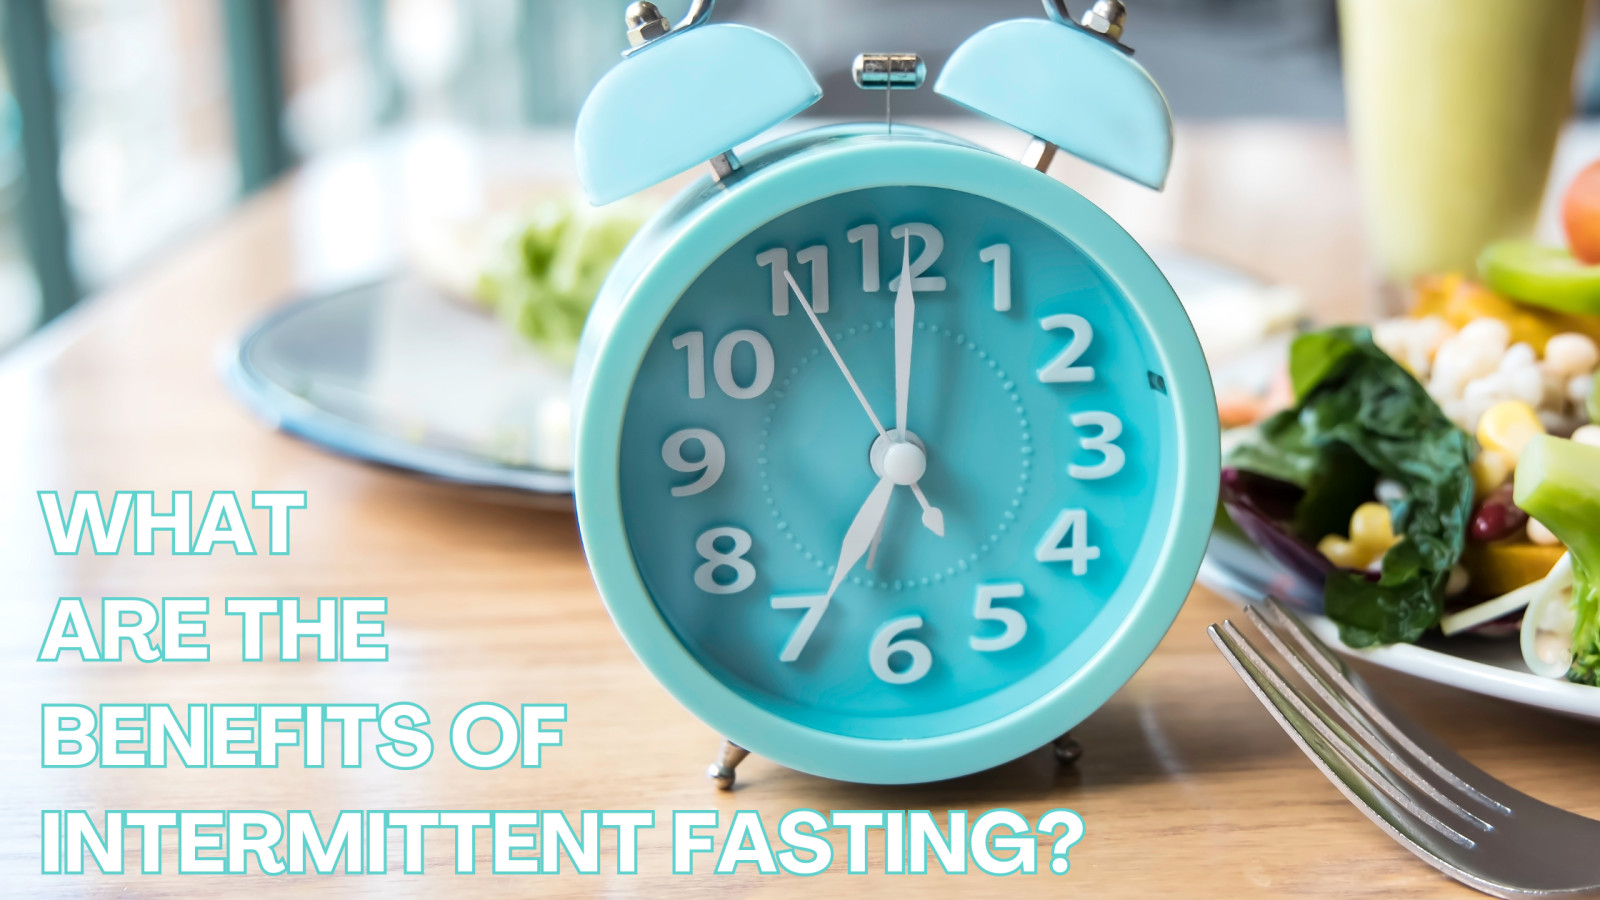 What are the Benefits of Intermittent Fasting?